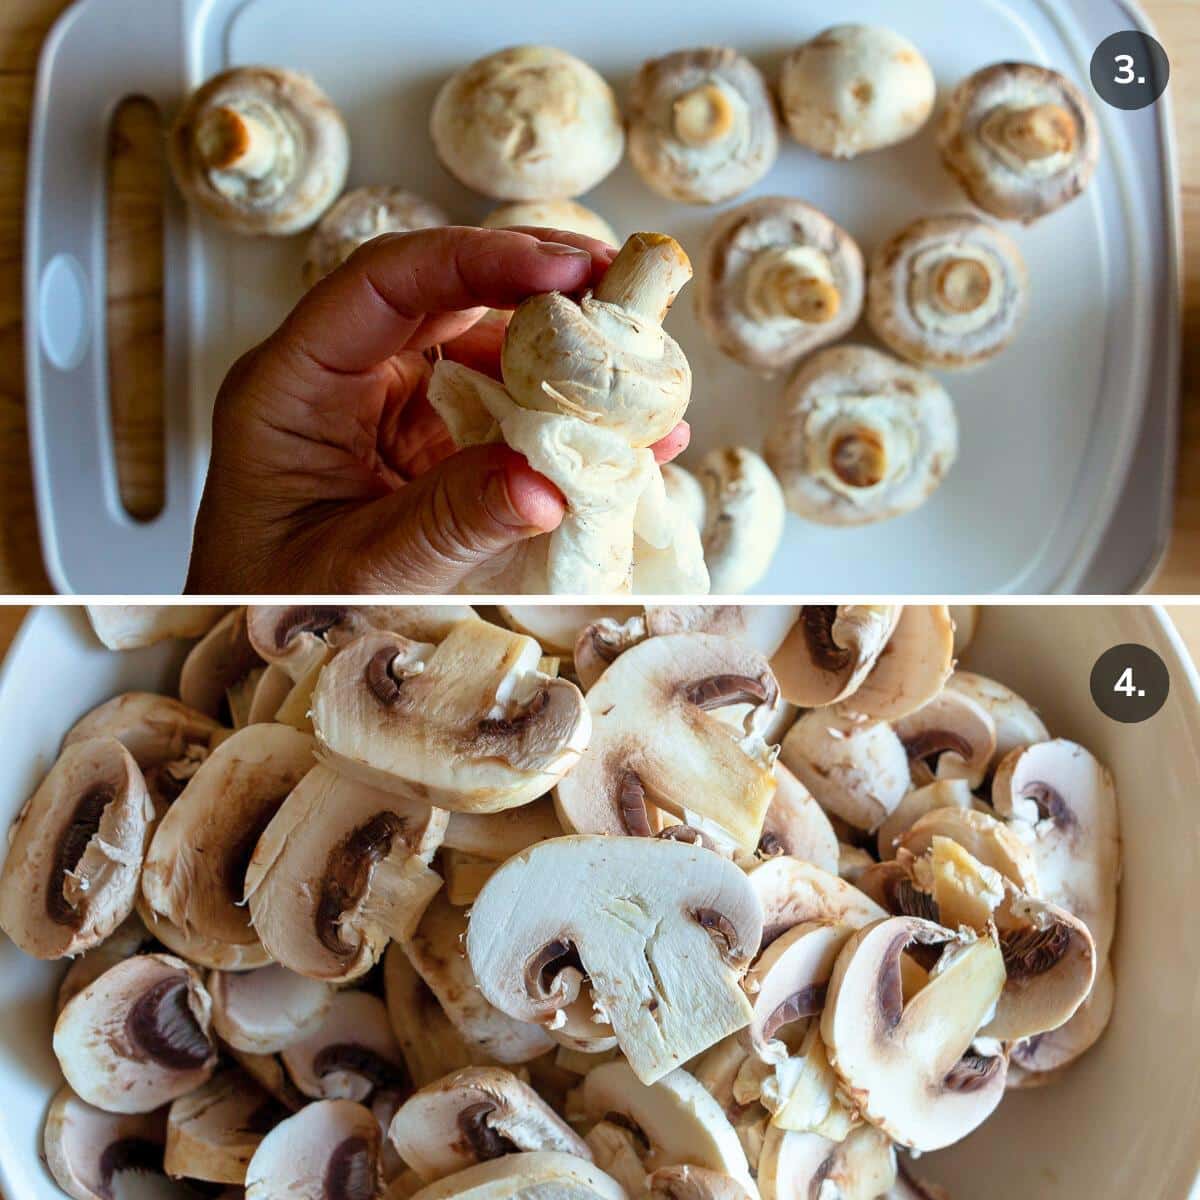 Cleaning the mushrooms with a damp paper towel and slicing.